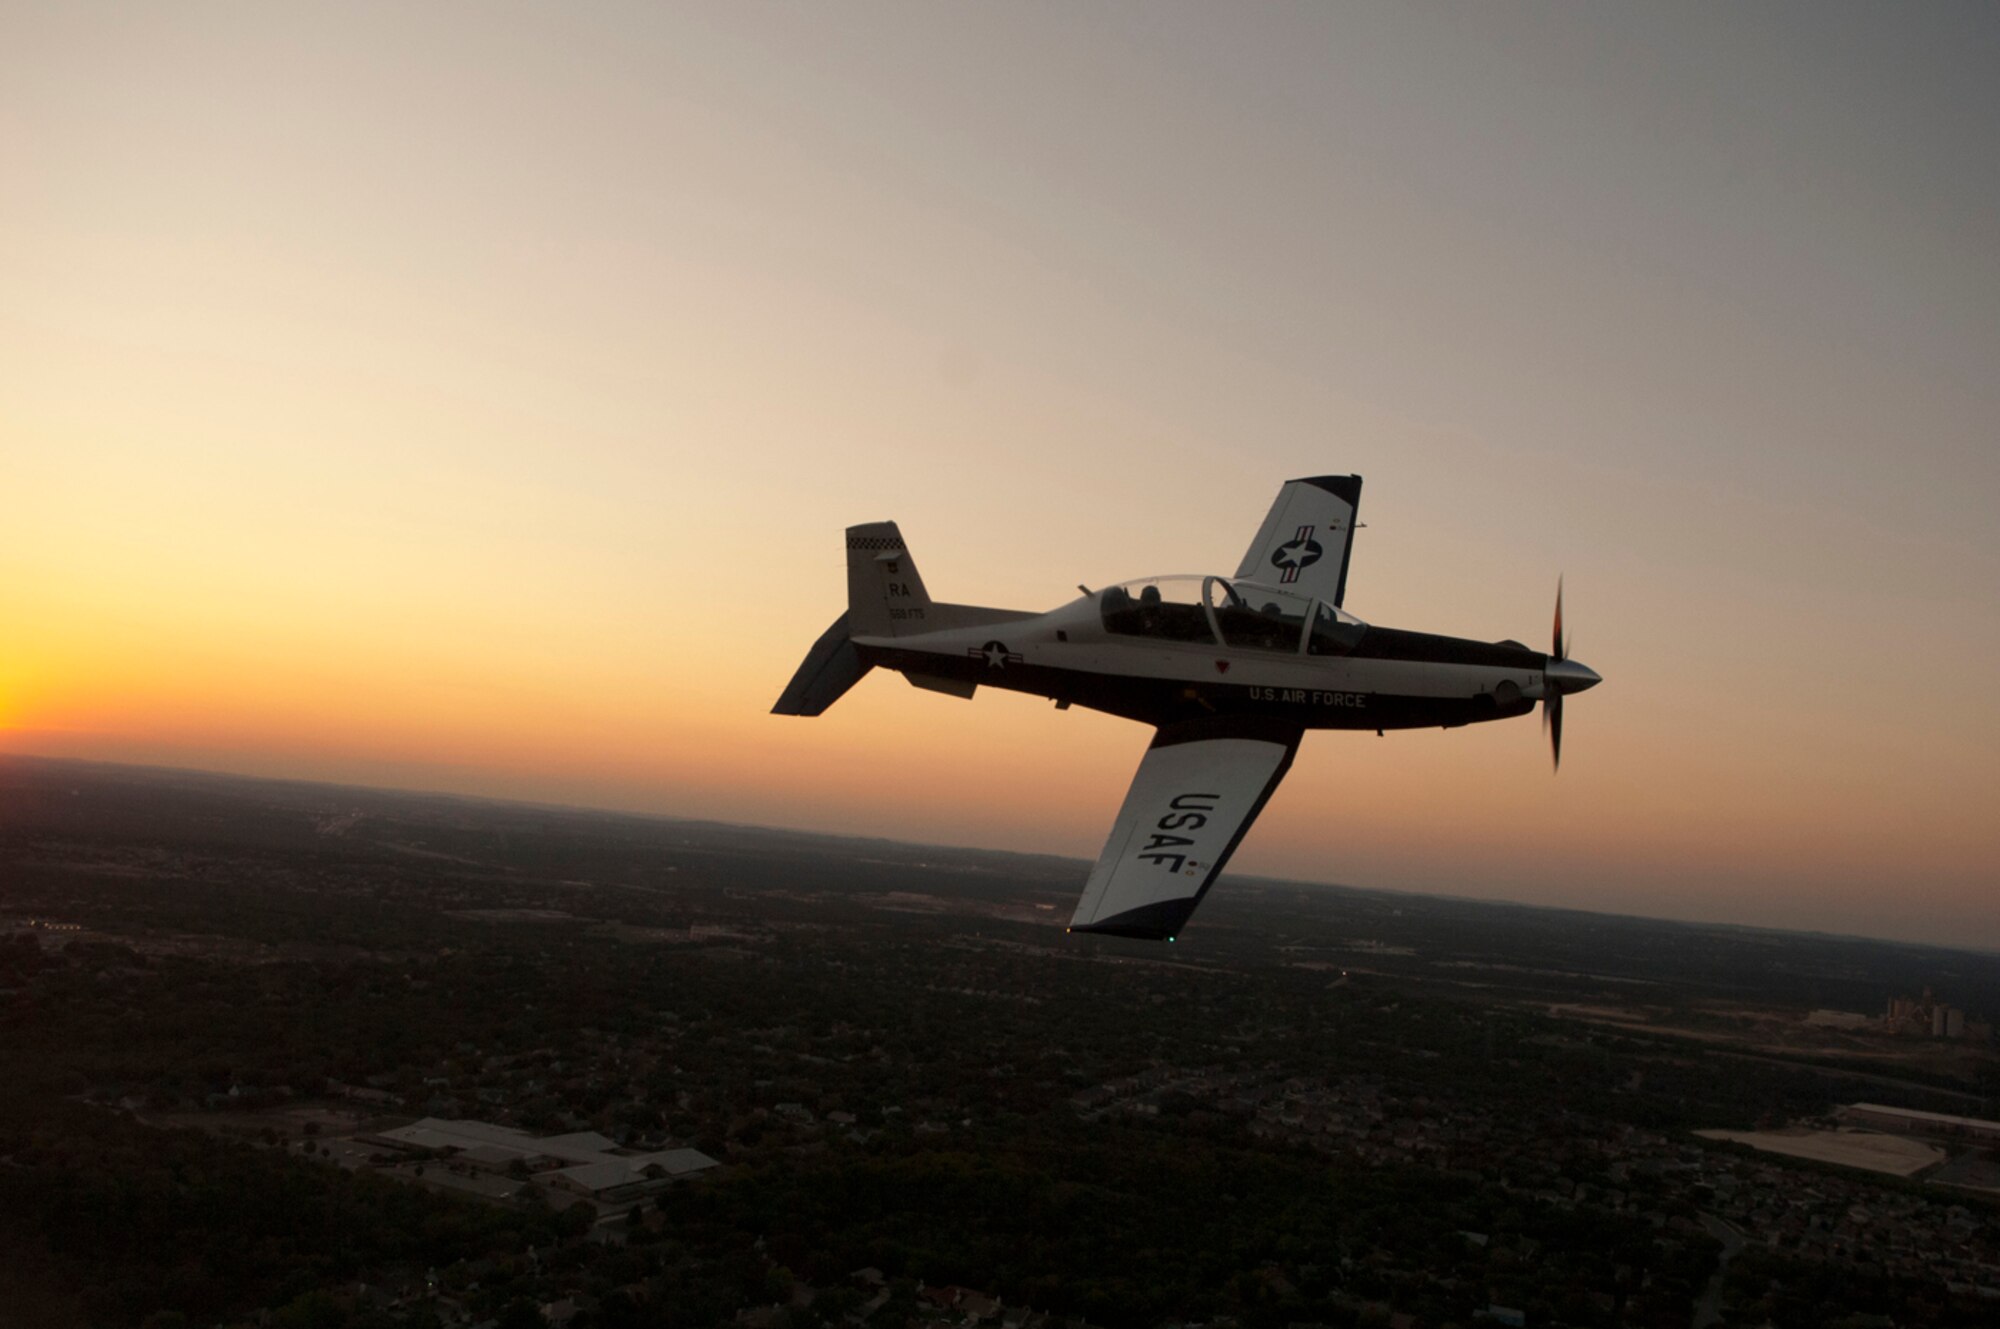 Two T-6 Texan II pilots from Moody AFB, Ga., died when they crashed their plane on takeoff. The mishap investigation revealed flight discipline issues as the main contributor to the tragedy. The pilots failed to maintain a minimum safe air speed and bank angle, which resulted in an accelerated stall and complete loss of control of the training aircraft. (Photo by Tech. Sgt. Matthew Hannen)